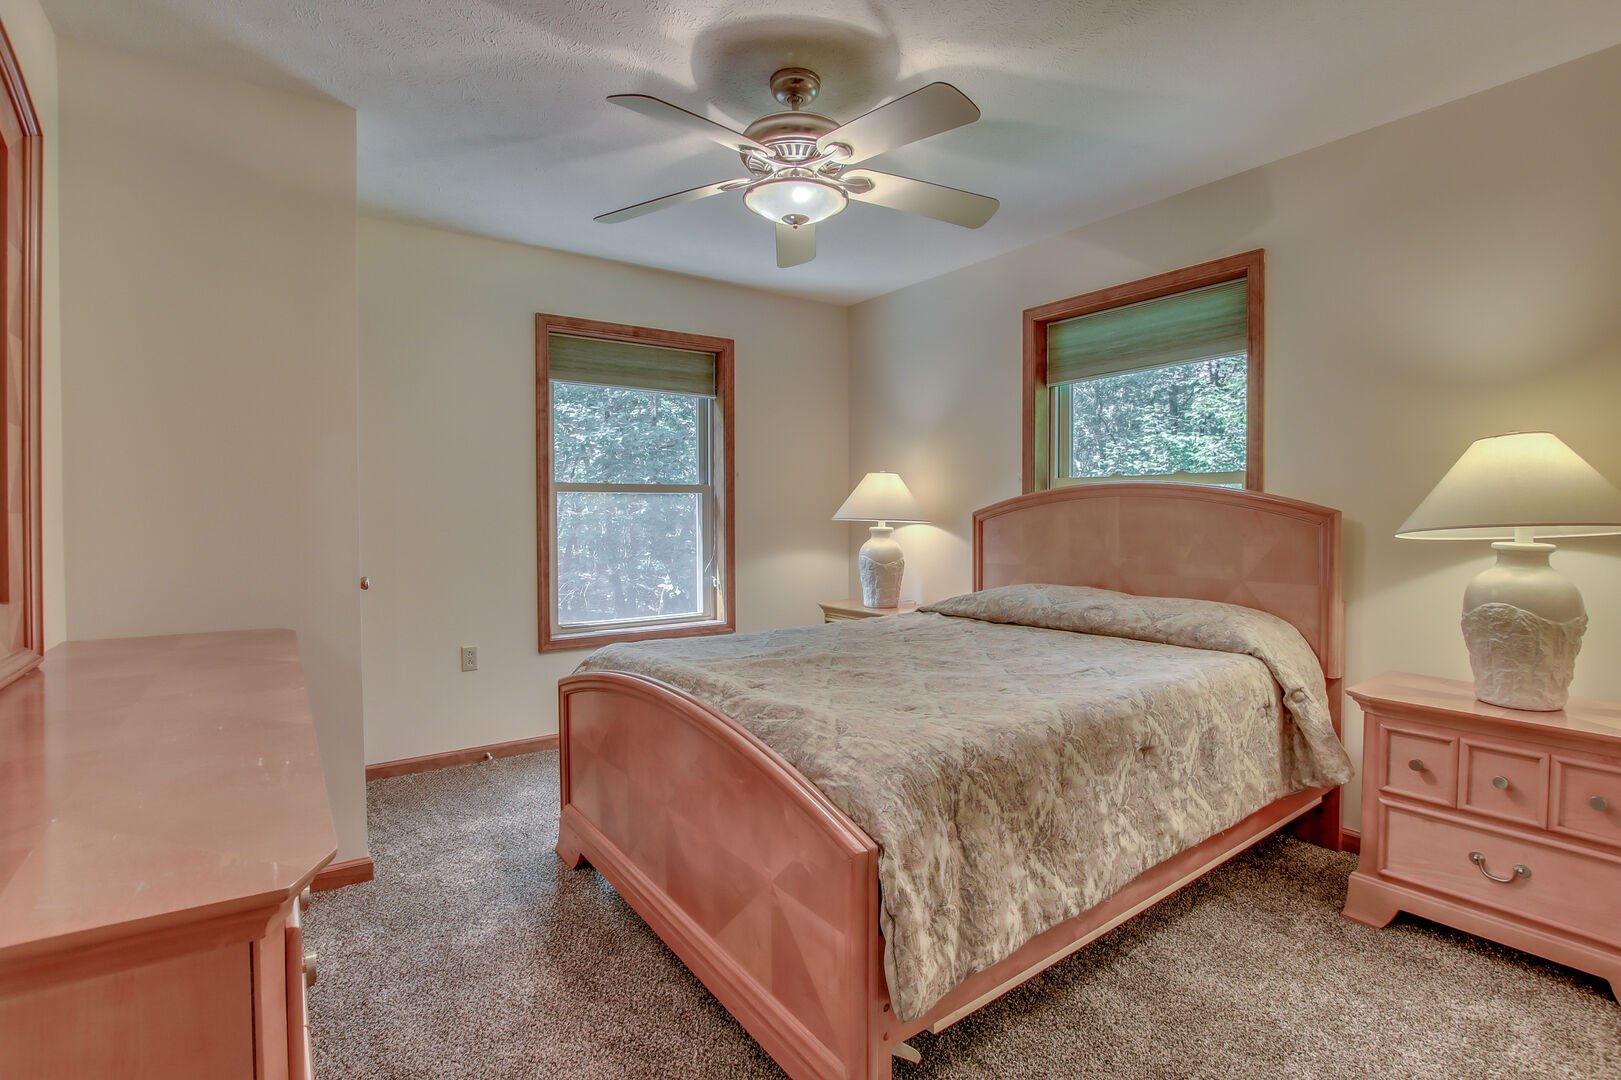 The bed in the master bedroom, with two nightstands on either side, and a vanity dresser at the foot of the bed.